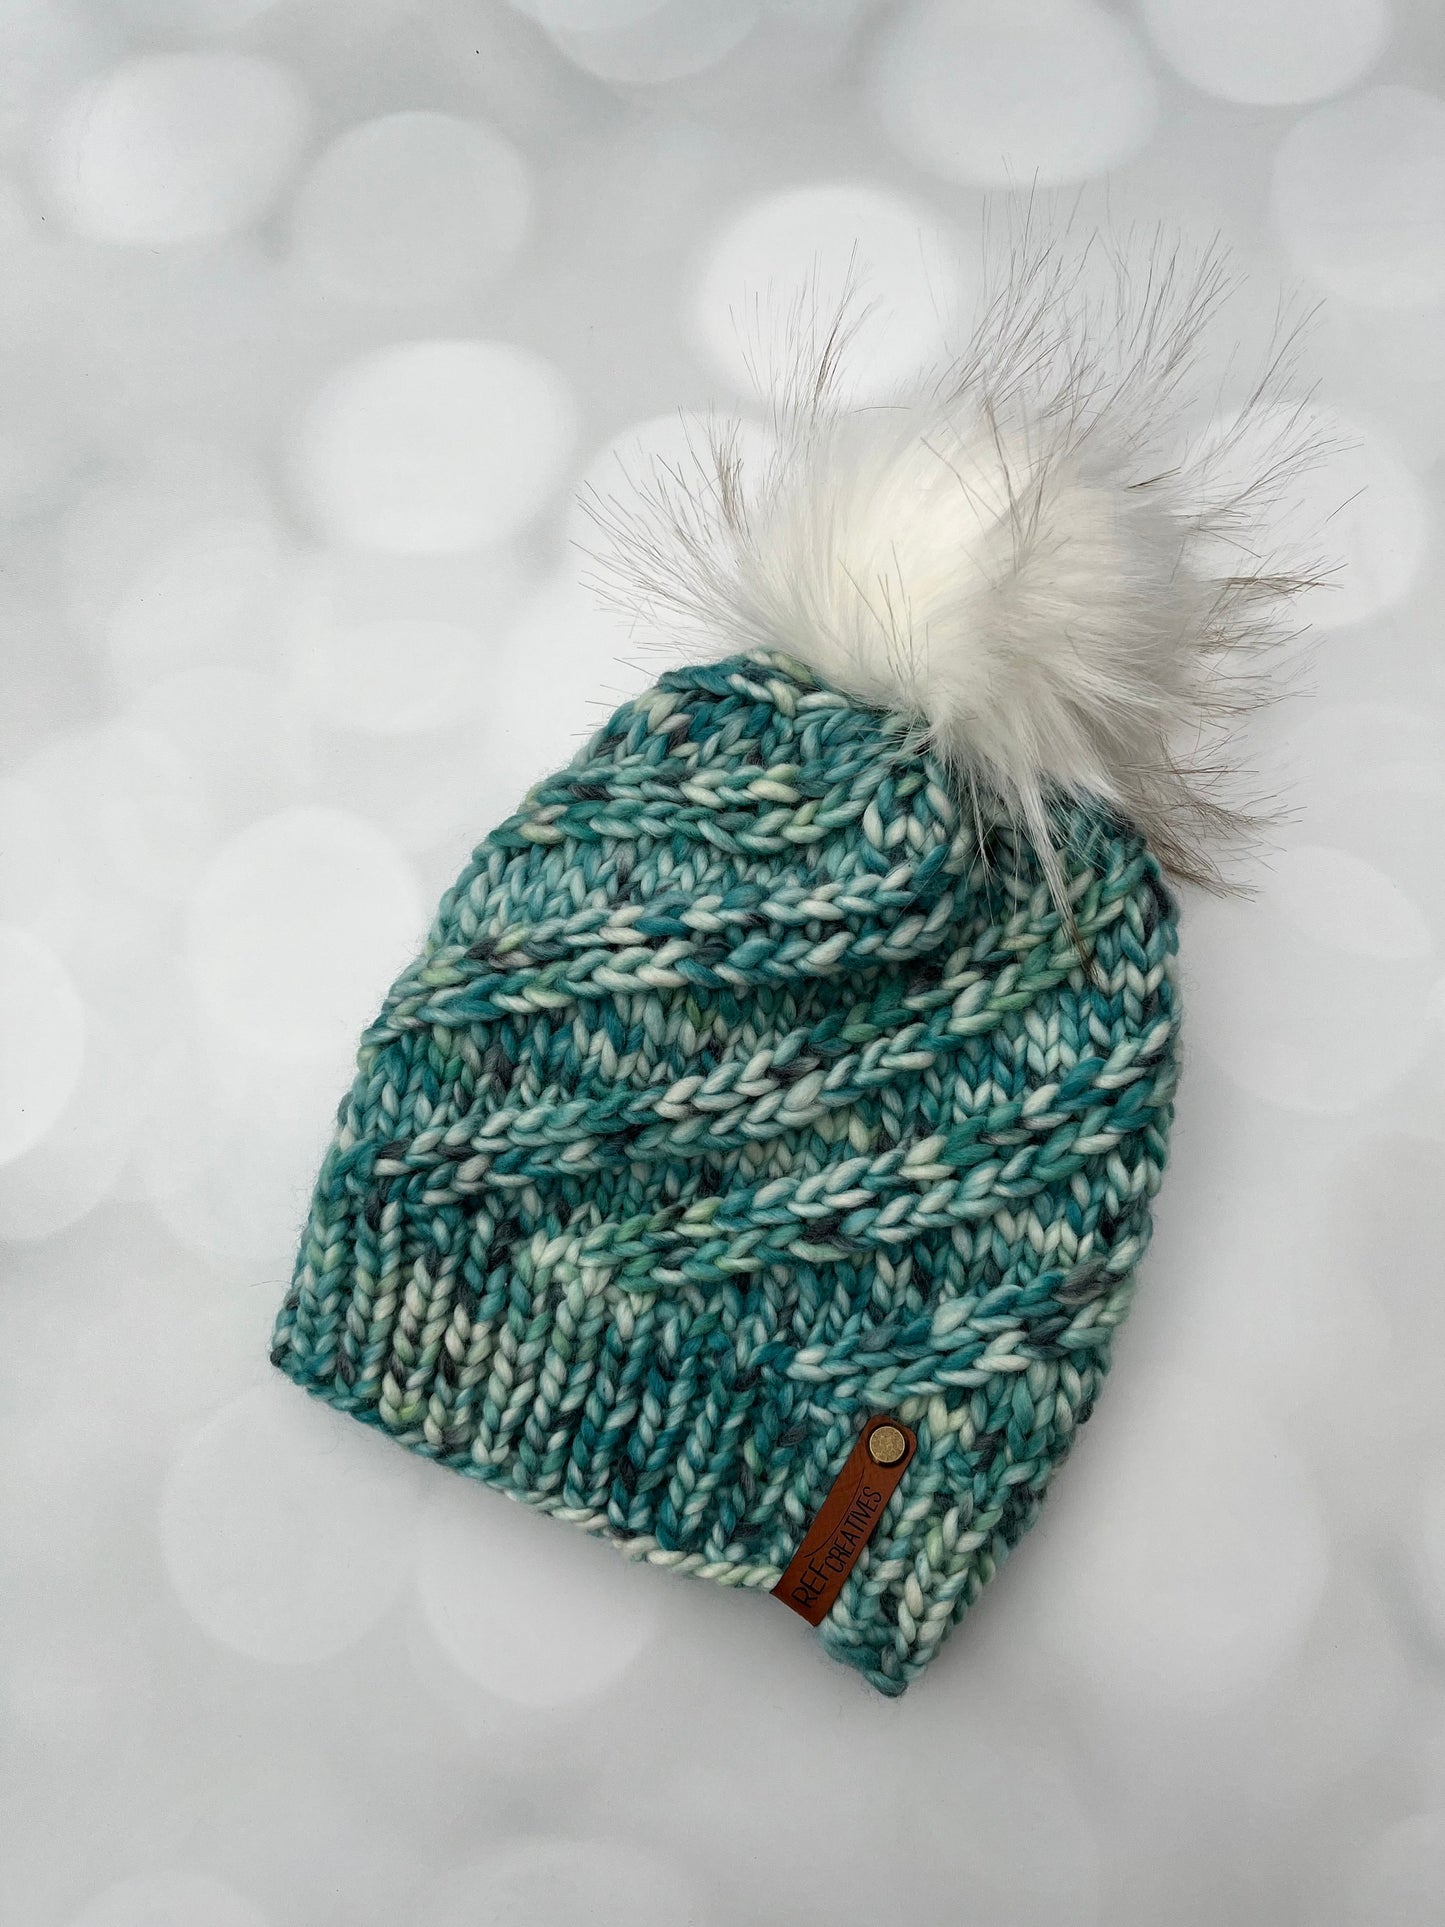 Luxury Teal Merino Wool Knit Hat - Teal and White Swirls Hand Knit Hat with Hand Dyed Yarn